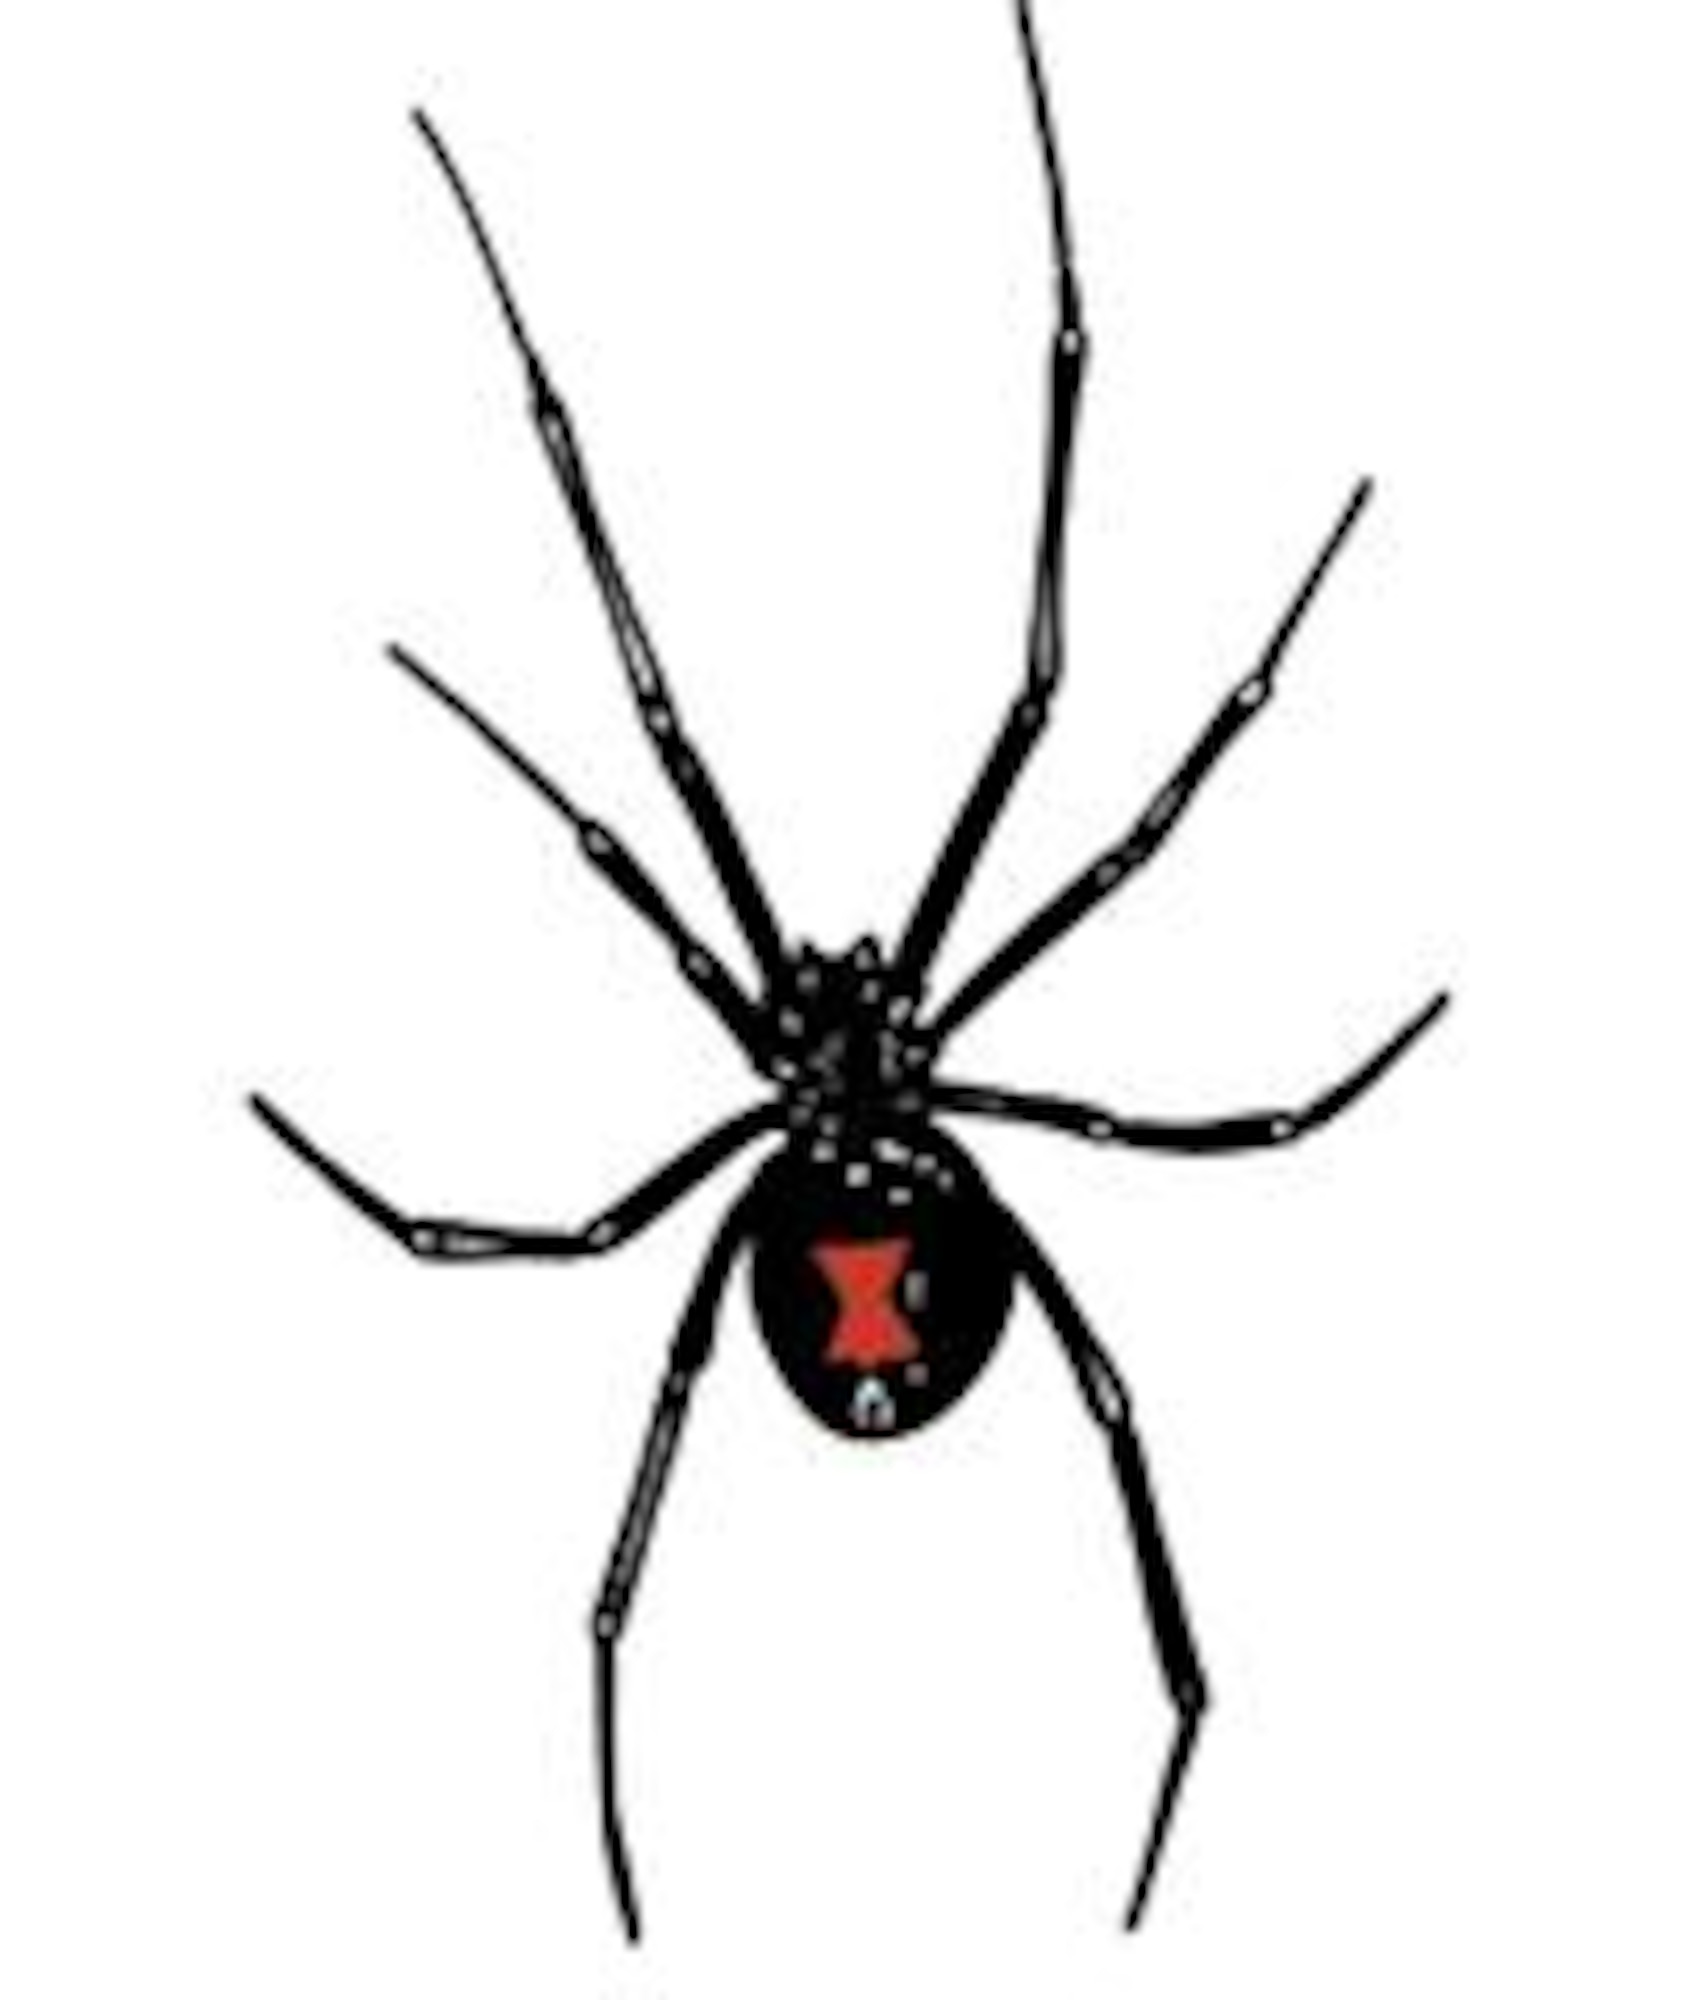 MOUNTAIN HOME AIR FORCE BASE, Idaho – The black widow ia a highly venomous species of spider and are well known for their distinctive black and red coloring of the female of the species. The female black widow’s venom is harmful to humans and the injection of venom from these species is a comparatively dangerous or lethal bite. 